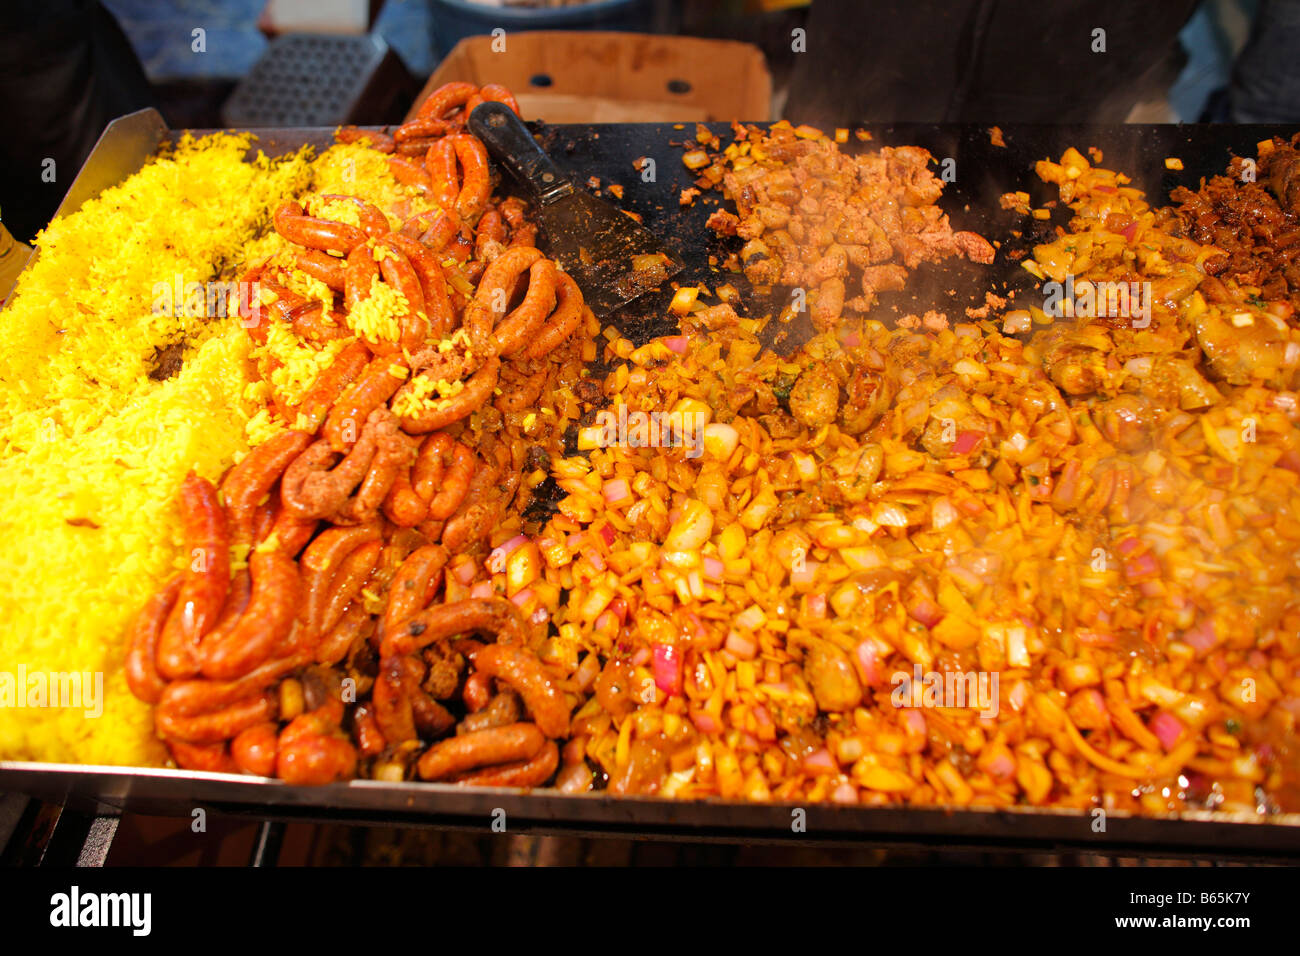 Sausages and vegetables on a grill, Market, Rabat, Morocco, Africa Stock Photo